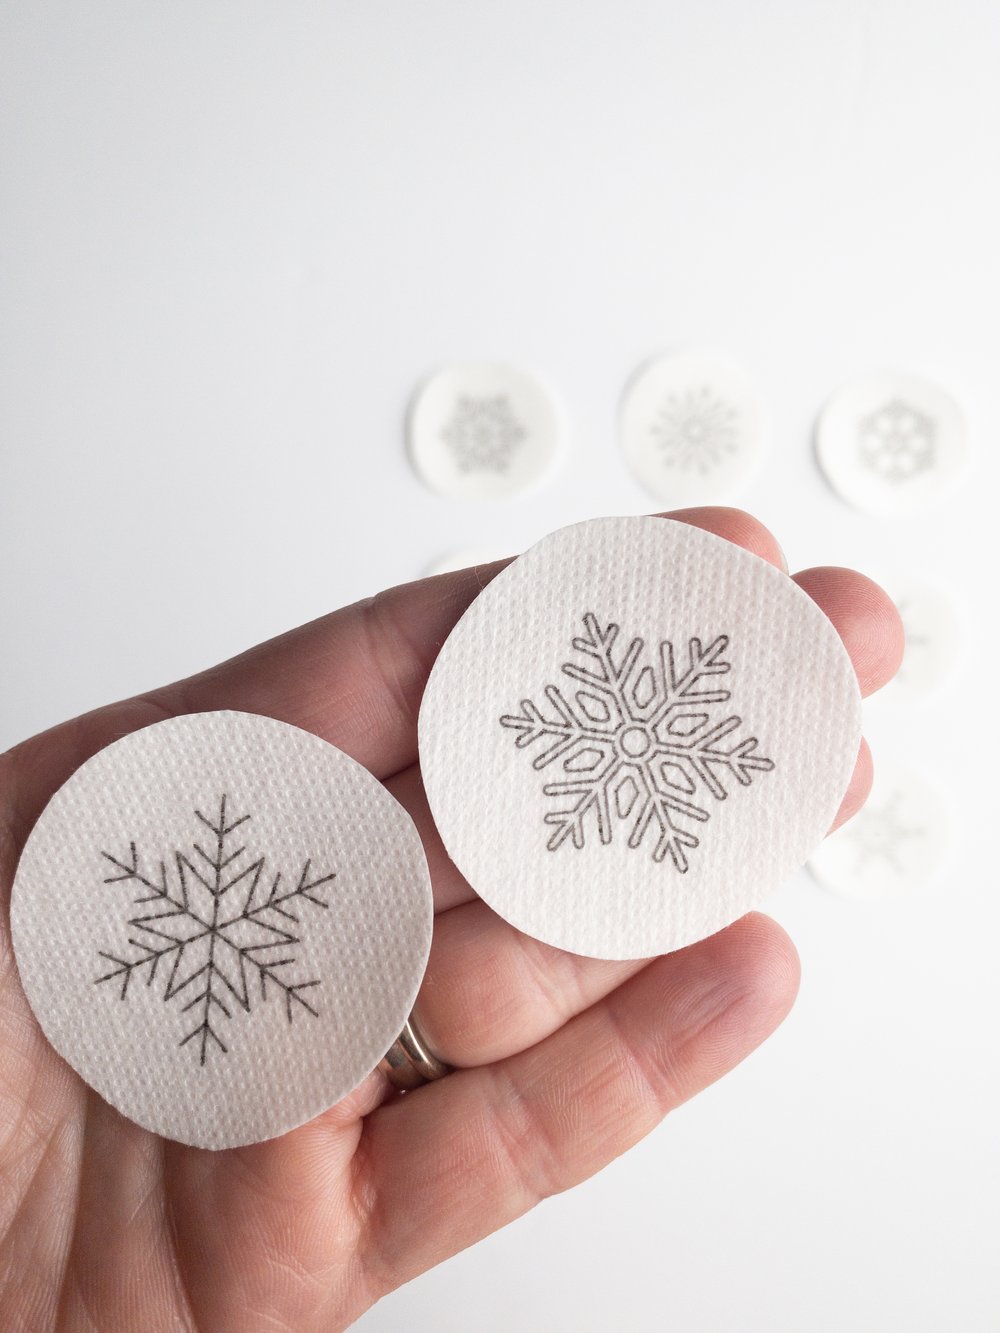 Mini Snowflake Stick & Stitch Embroidery Patterns — Olmsted Needlework Co.